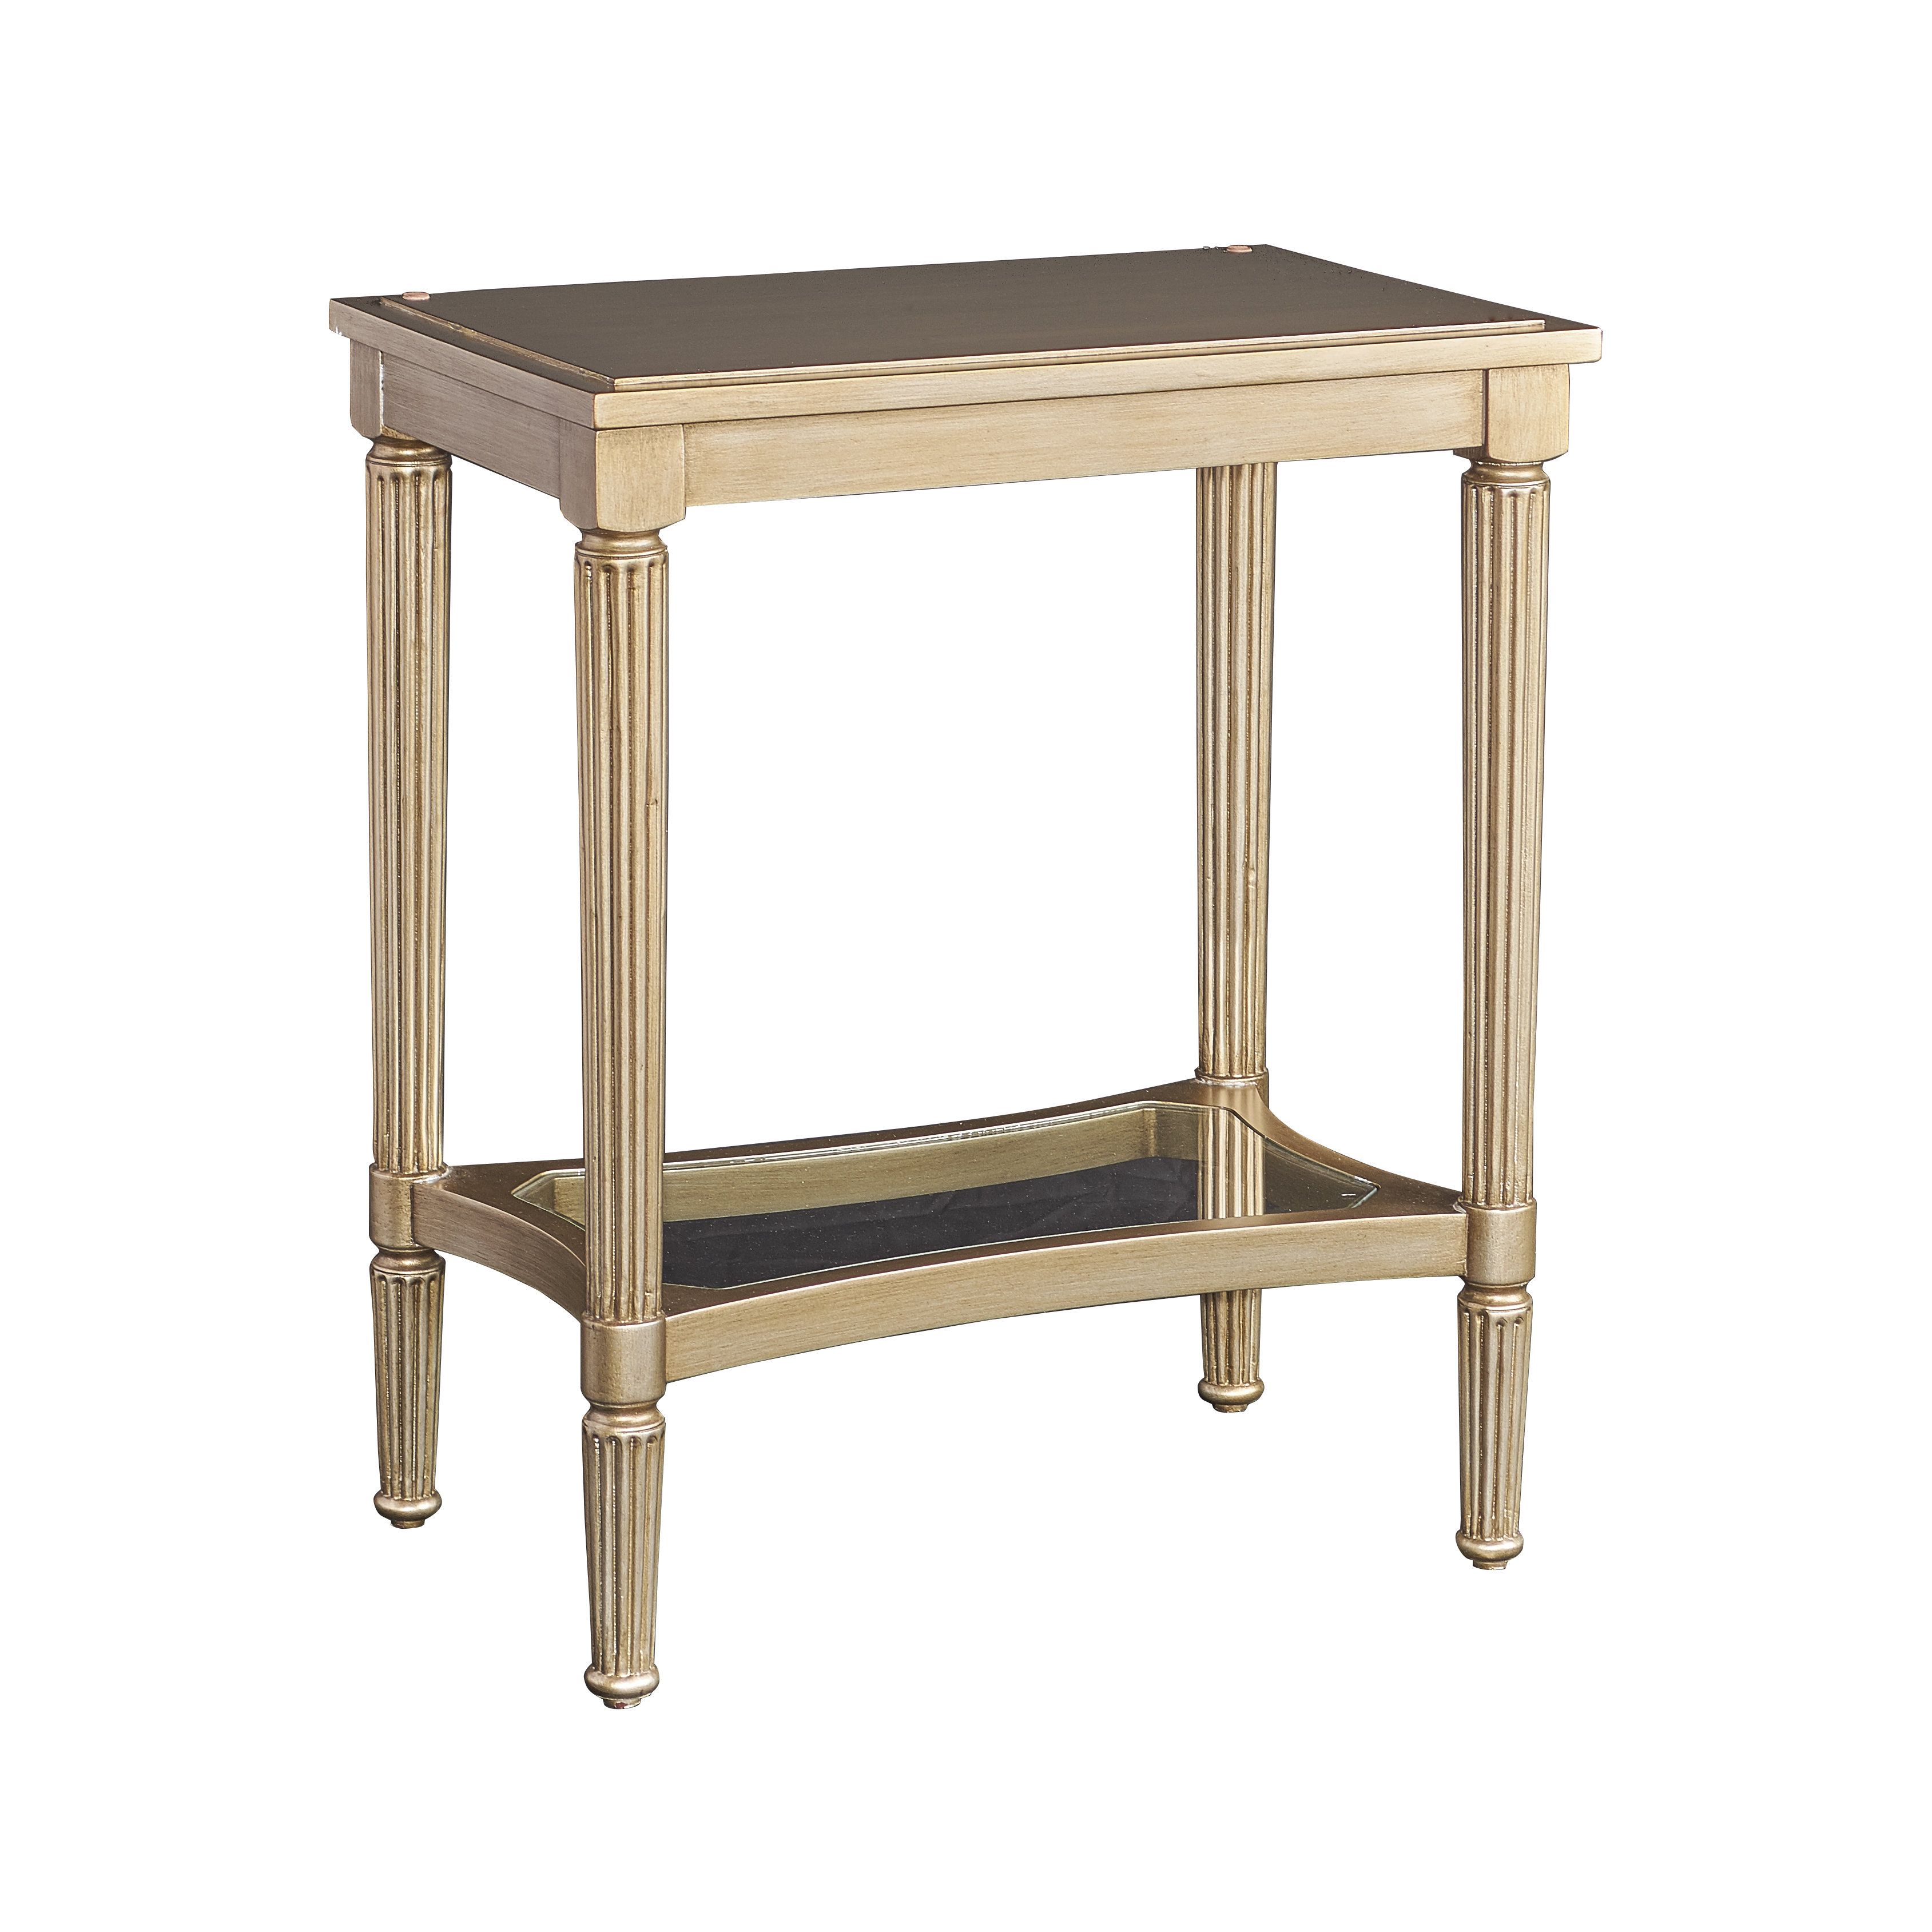 powell masterpiece mia gold wood and mirrored glass serving tray accent table with drawer glamour finish outdoor patio sets clearance small metal carpet trim farmhouse dining room